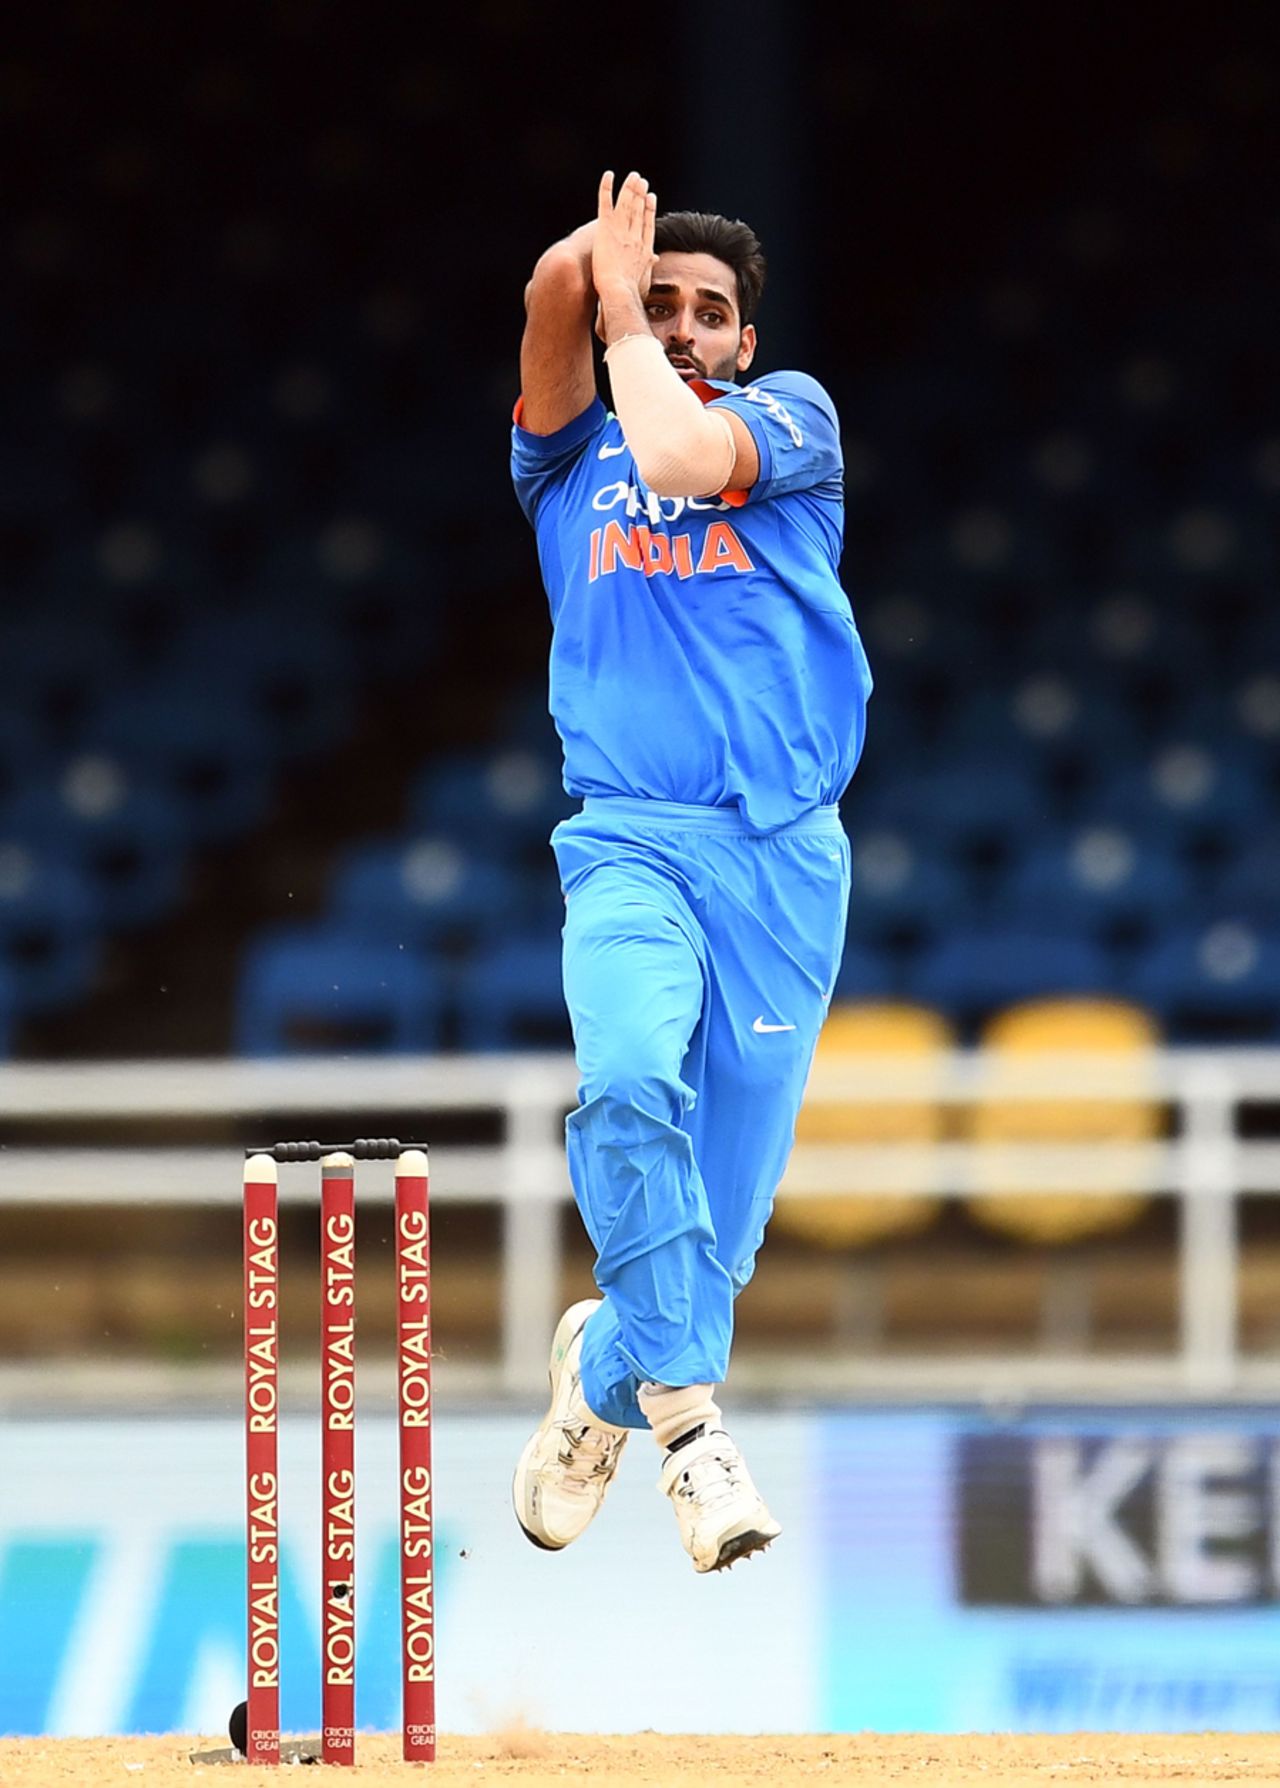 Bhuvneshwar Kumar took two wickets in his first two overs, West Indies v India, 2nd ODI, Port-of-Spain, June 25, 2017